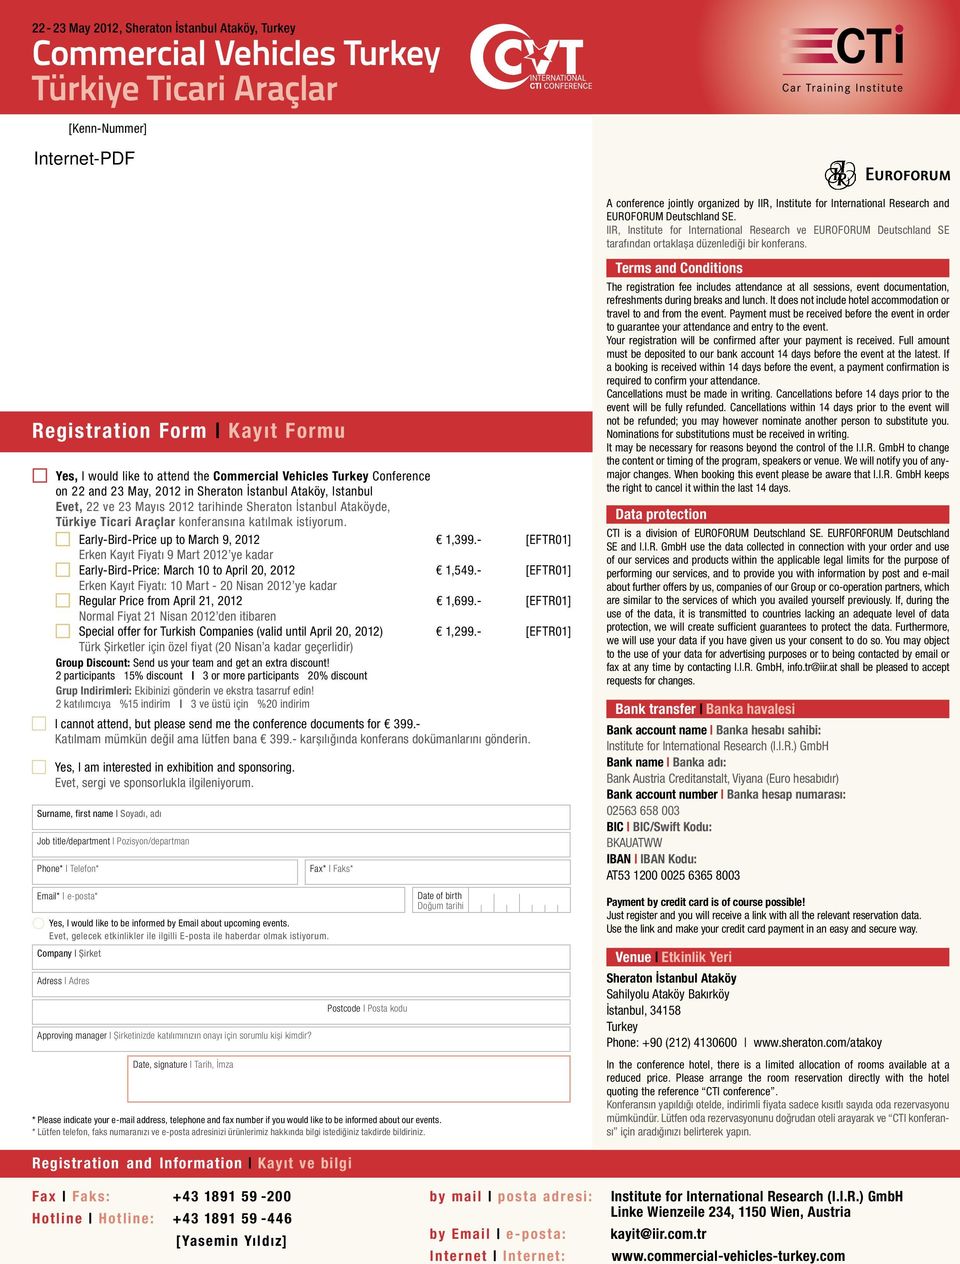 Registration Form Kayıt Formu Yes, I would like to attend the Commercial Vehicles Turkey Conference on 22 and 23 May, 2012 in Sheraton İstanbul Ataköy, Istanbul Evet, 22 ve 23 Mayıs 2012 tarihinde